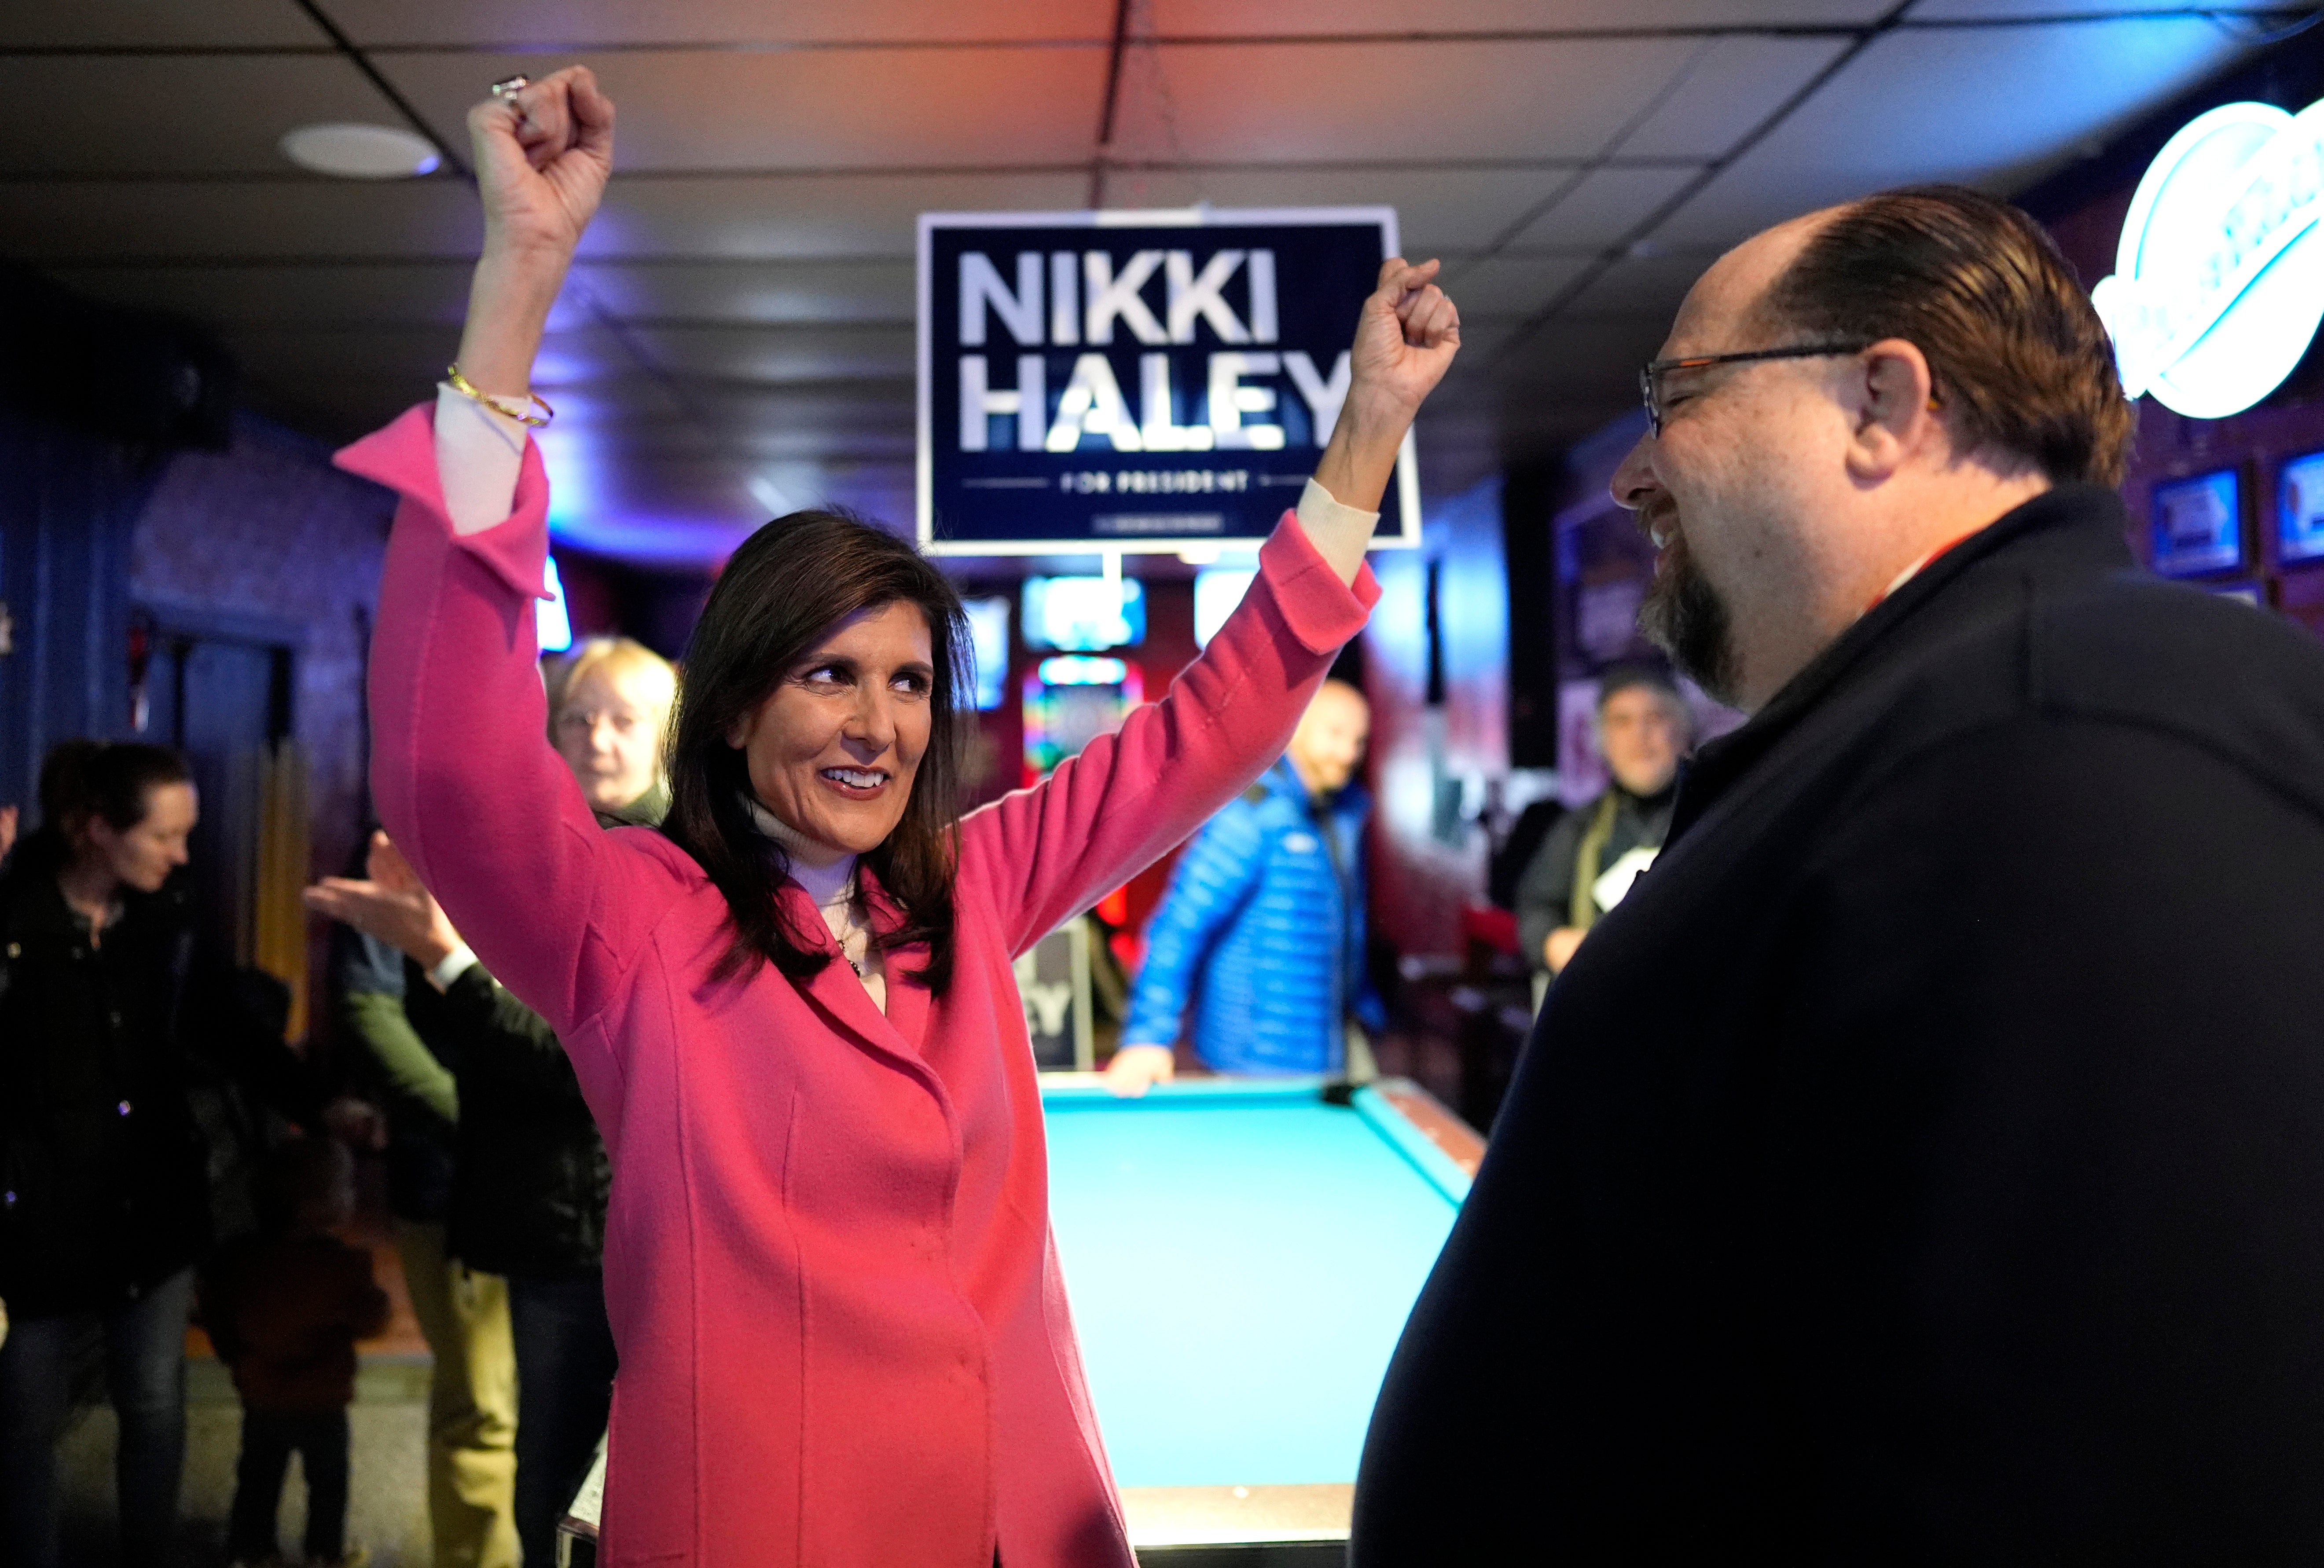 Nikki Haley in Iowa on Monday ahead of her disappointing performance in the caucuses